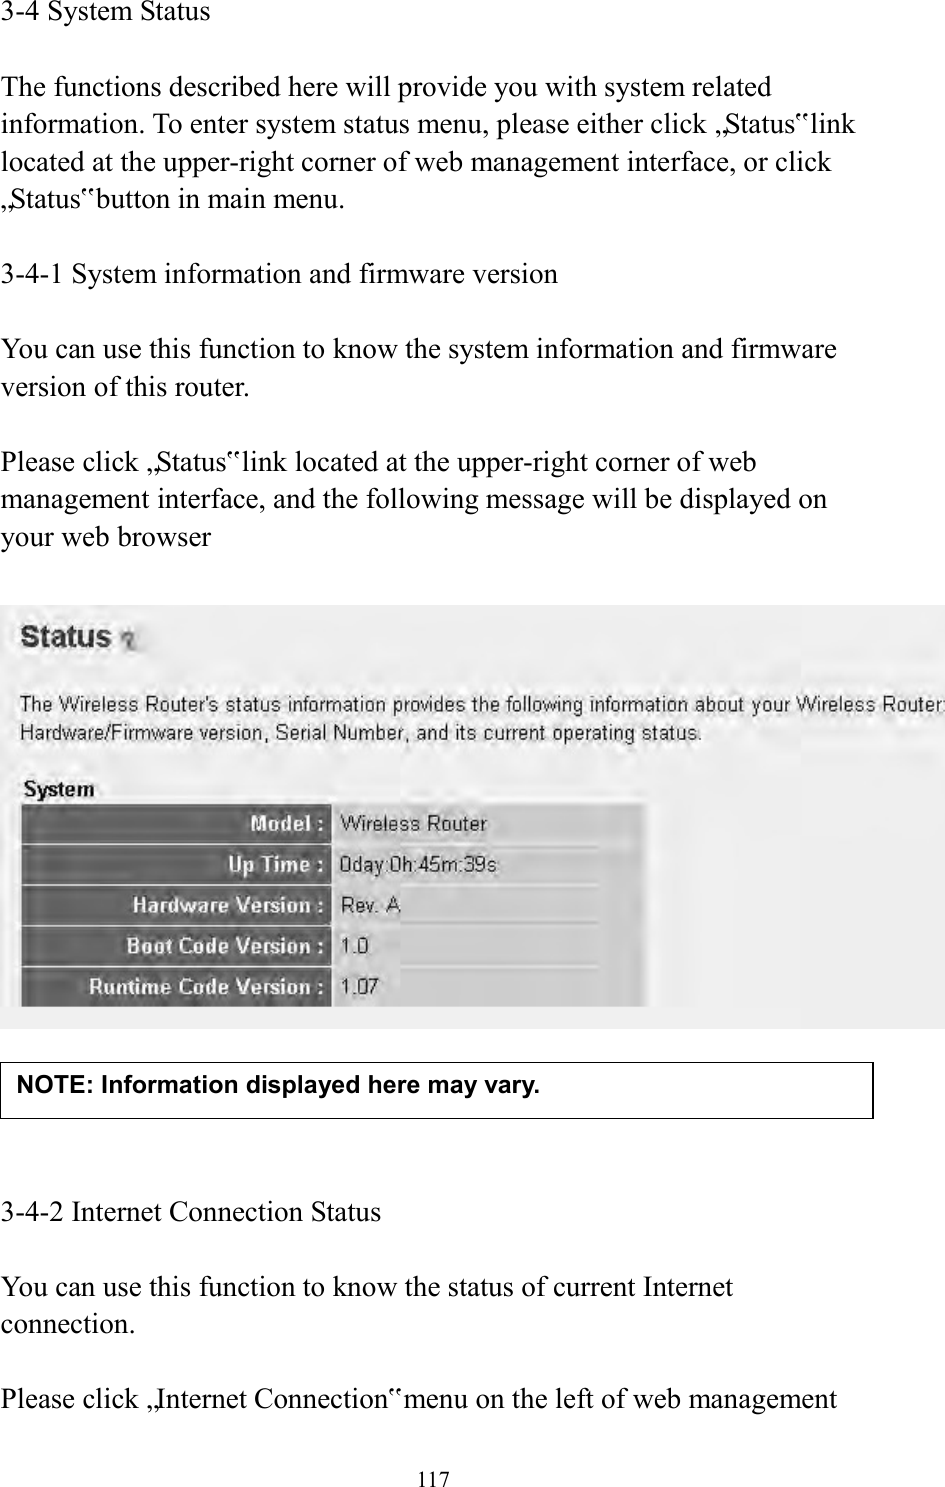  117 3-4 System Status  The functions described here will provide you with system related information. To enter system status menu, please either click „Status‟ link located at the upper-right corner of web management interface, or click „Status‟ button in main menu.  3-4-1 System information and firmware version  You can use this function to know the system information and firmware version of this router.  Please click „Status‟ link located at the upper-right corner of web management interface, and the following message will be displayed on your web browser       3-4-2 Internet Connection Status  You can use this function to know the status of current Internet connection.  Please click „Internet Connection‟ menu on the left of web management NOTE: Information displayed here may vary. 